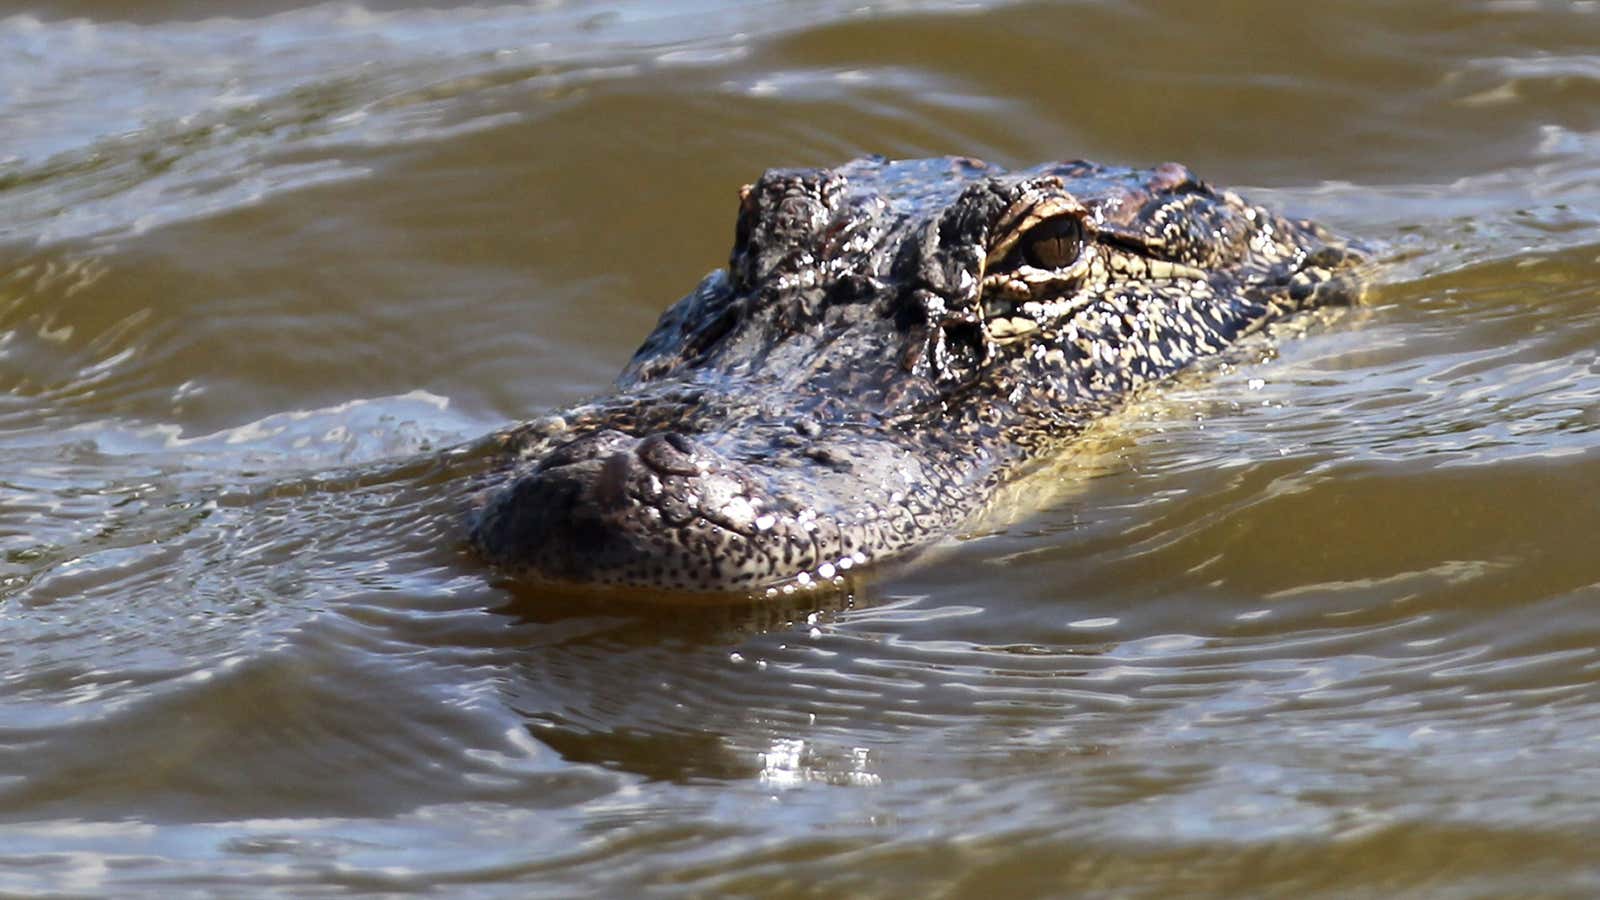 Alligators could be coming soon to a beach near you.